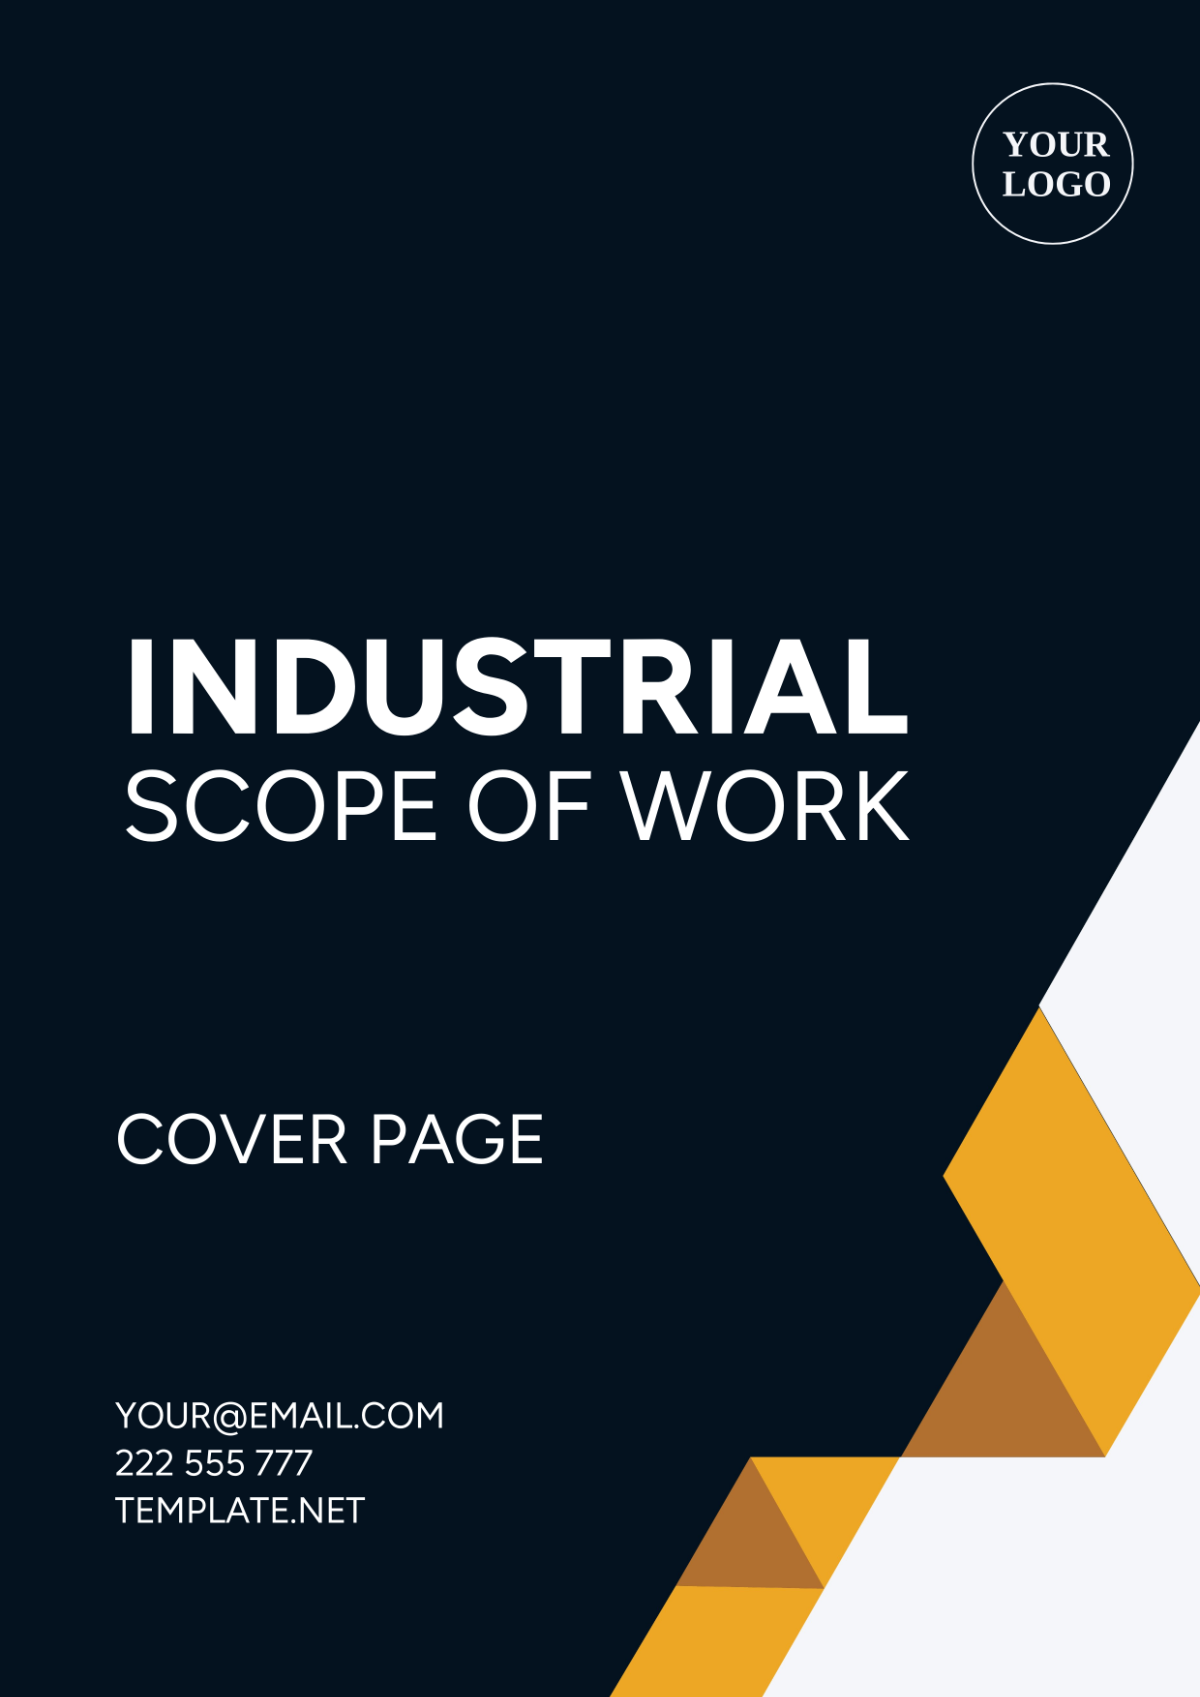 Industrial Scope of Work Cover Page